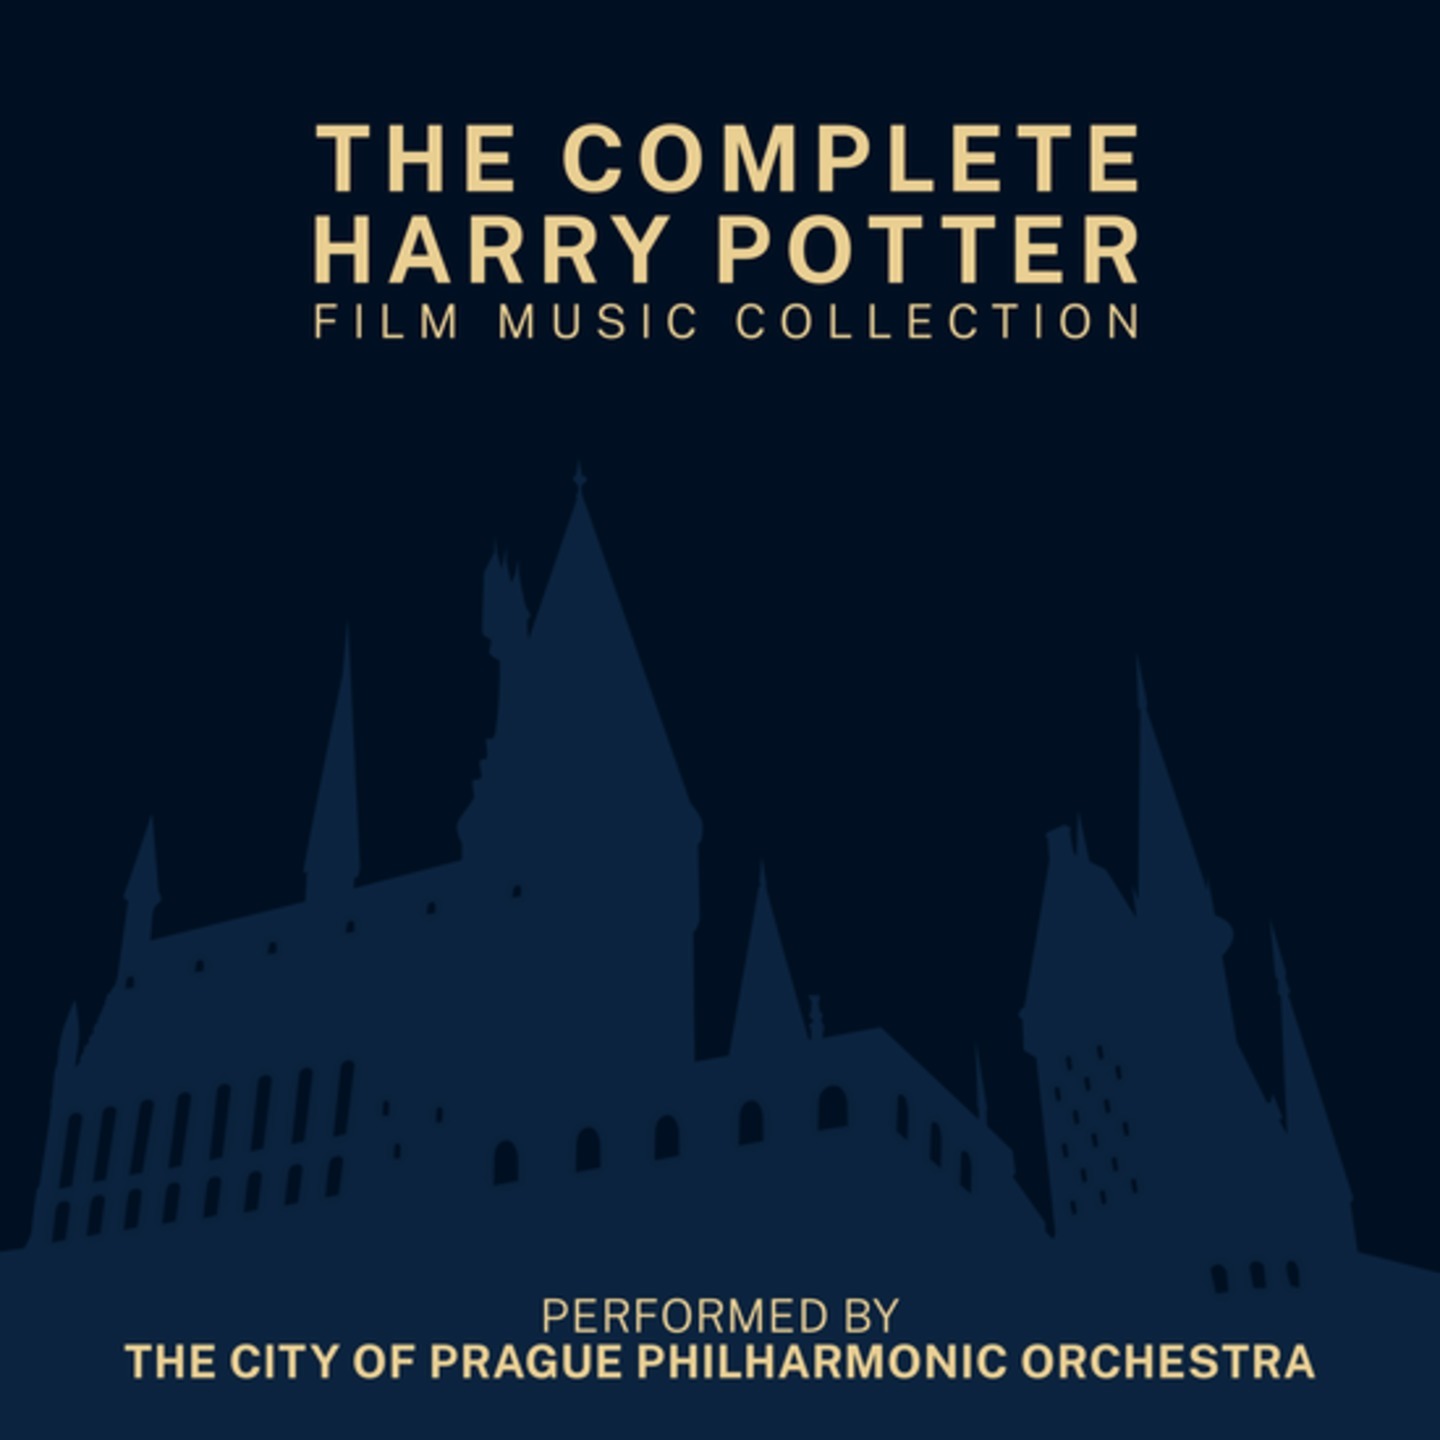 CITY OF PRAGUE PHILHARMONIC ORCHESTRA, THE - The Complete Harry Potter Film Music Collection 3xLP White Vinyl